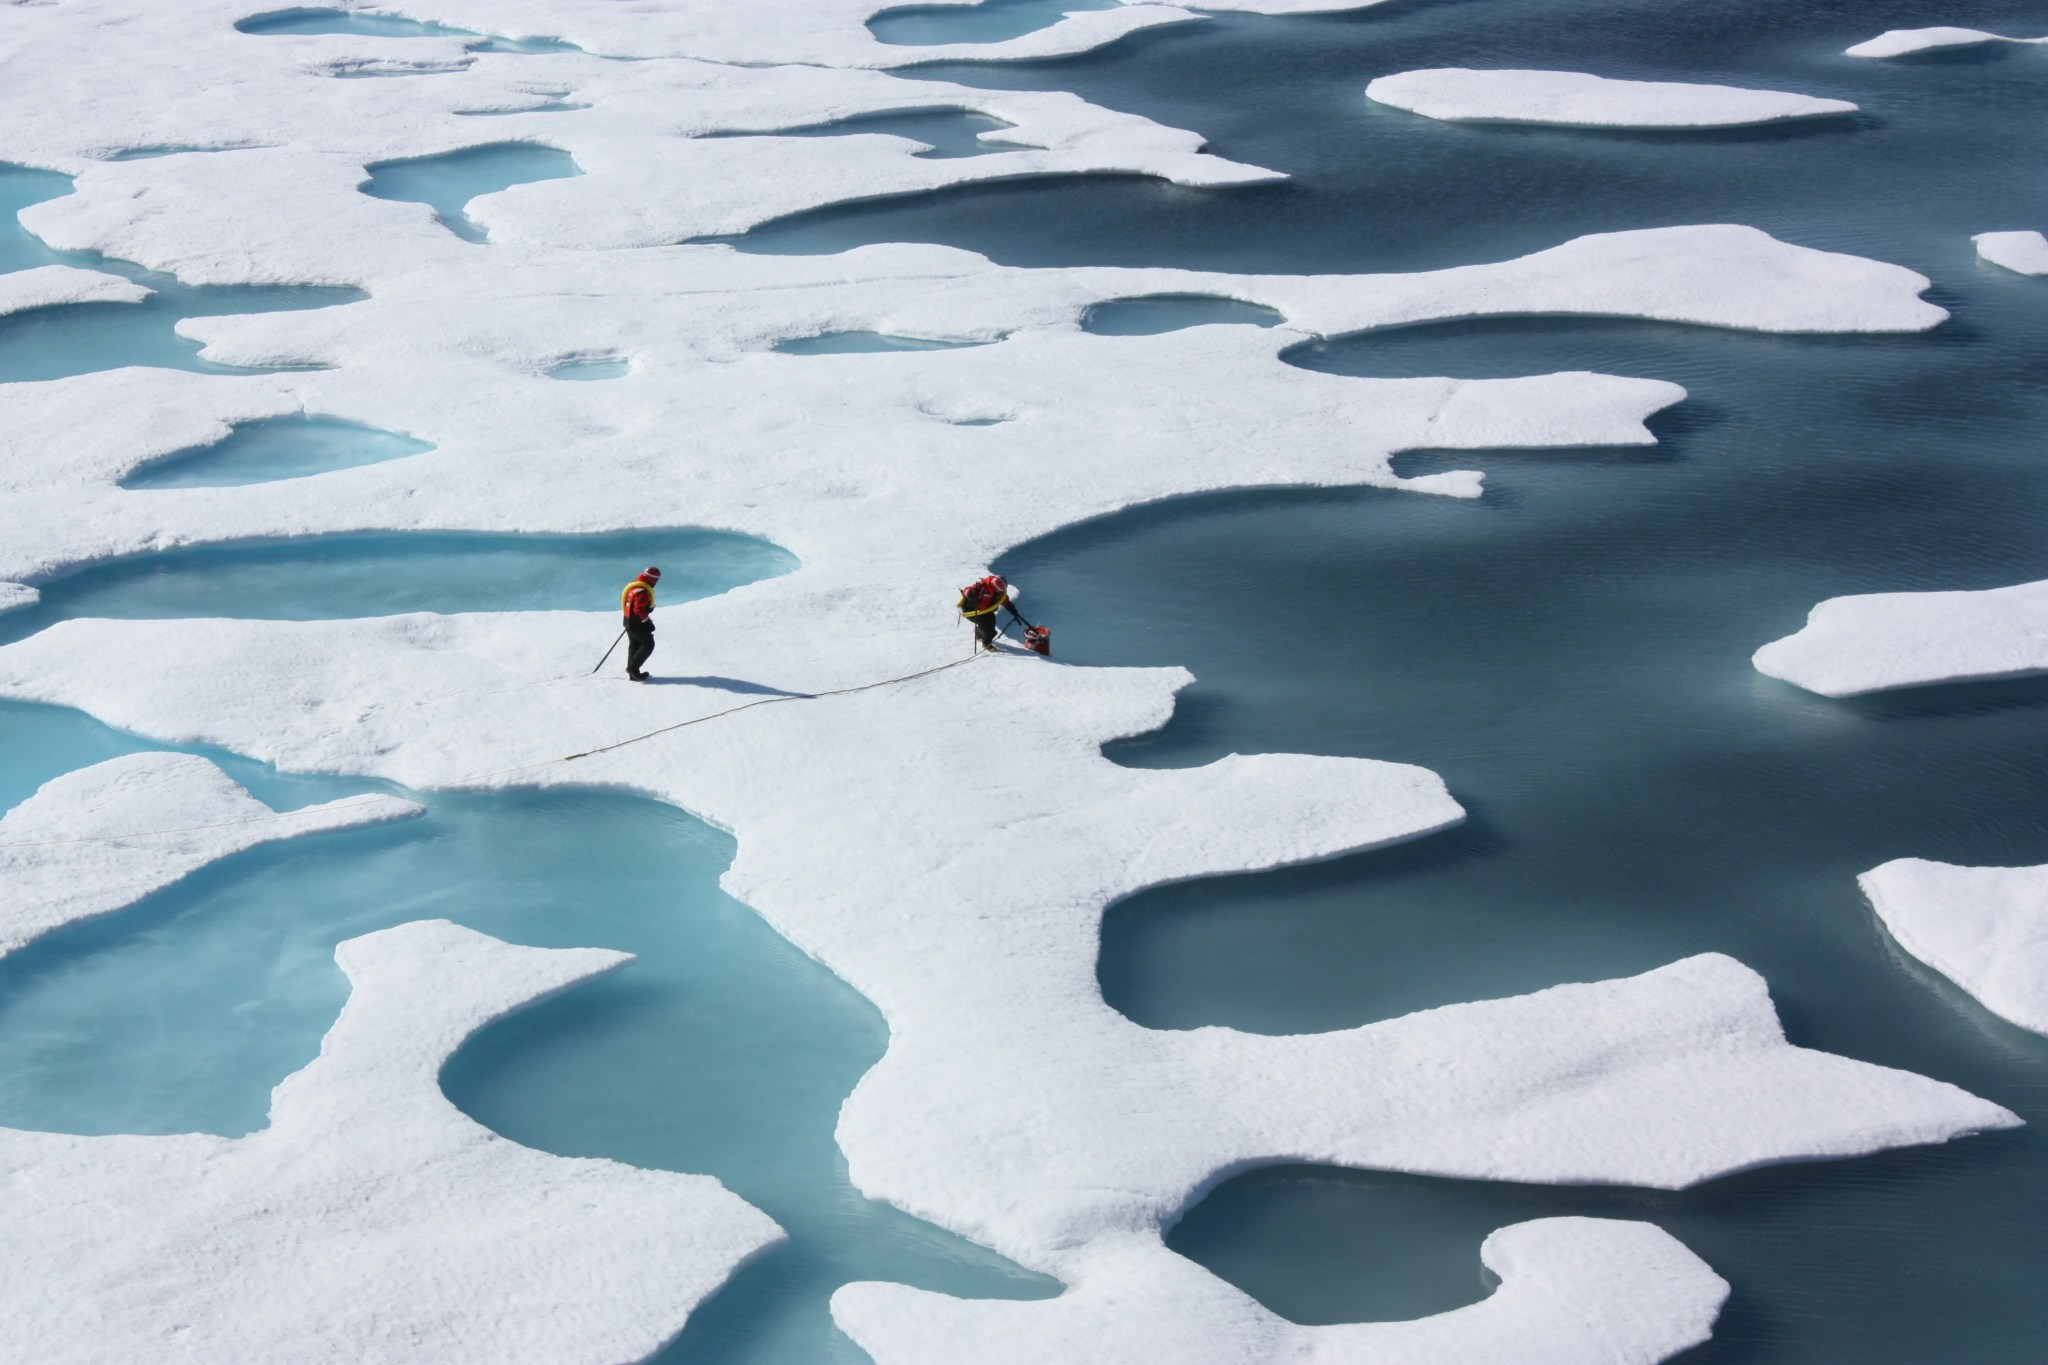 Science crew members retrieve a canister from melt ponds on the Arctic Ocean.